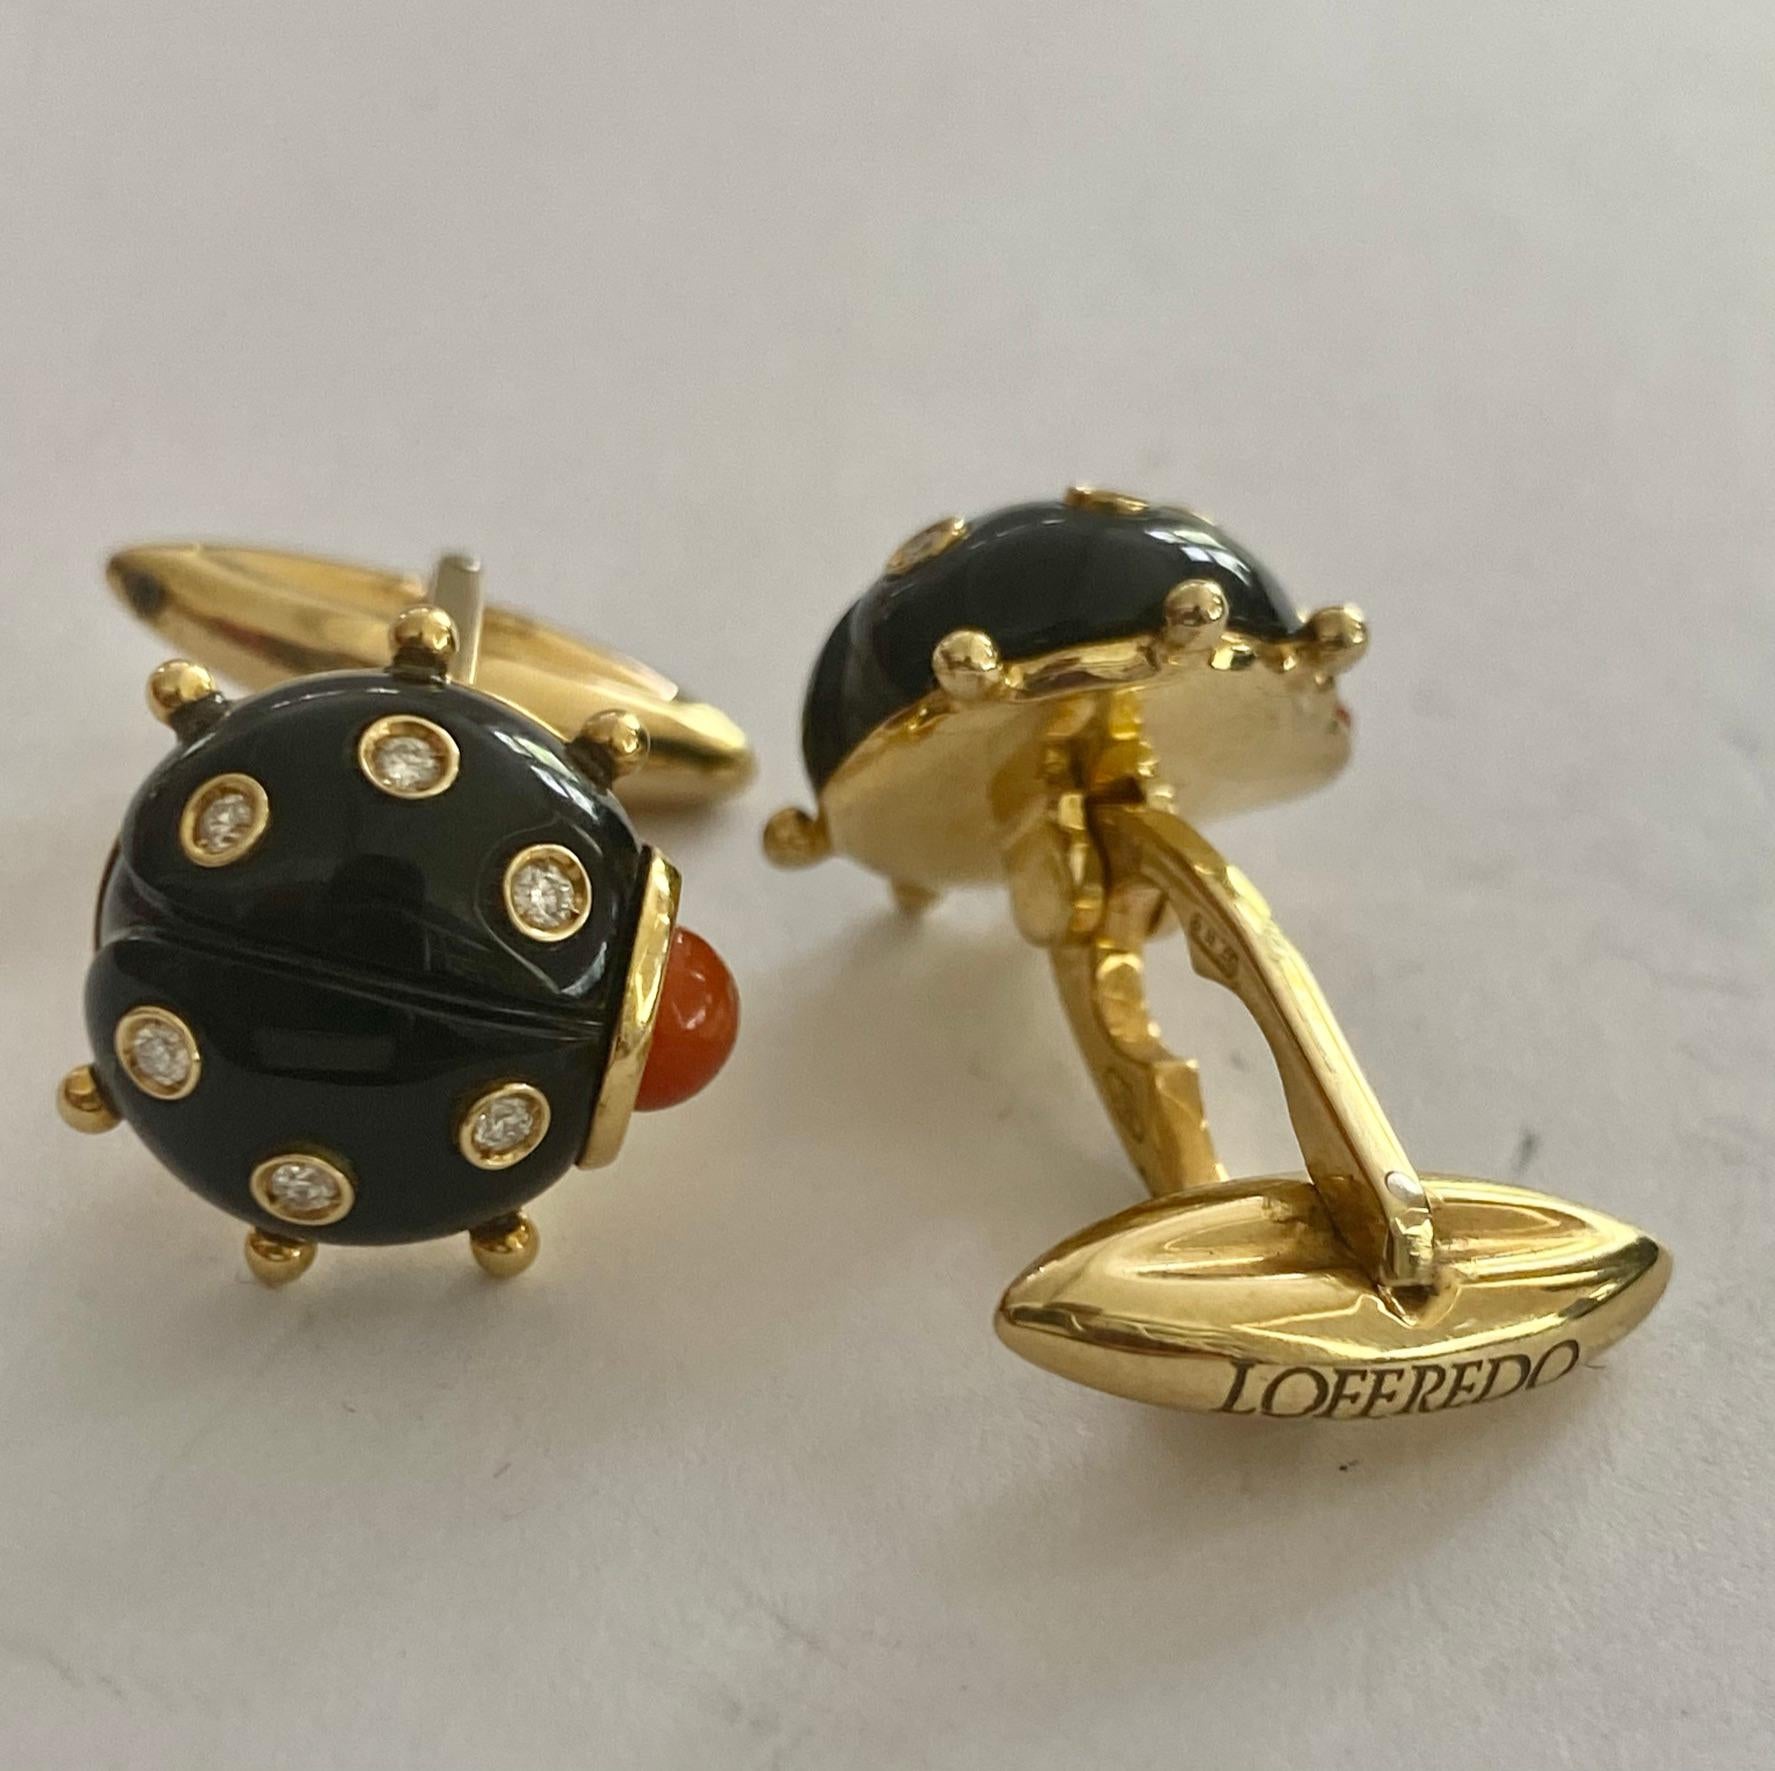 One (10 pairs of 18K yellow gold cufflinks in the shape of our Ladybird.
Signed; Loffredo (Italy)
Black enamel and set with 6 brilliant cut diamonds and a piece of red coral.
size: 14 x 14 x 6 mm
dimensions: back plate: 17 x 3 x 5 mm
Weight: 11.67